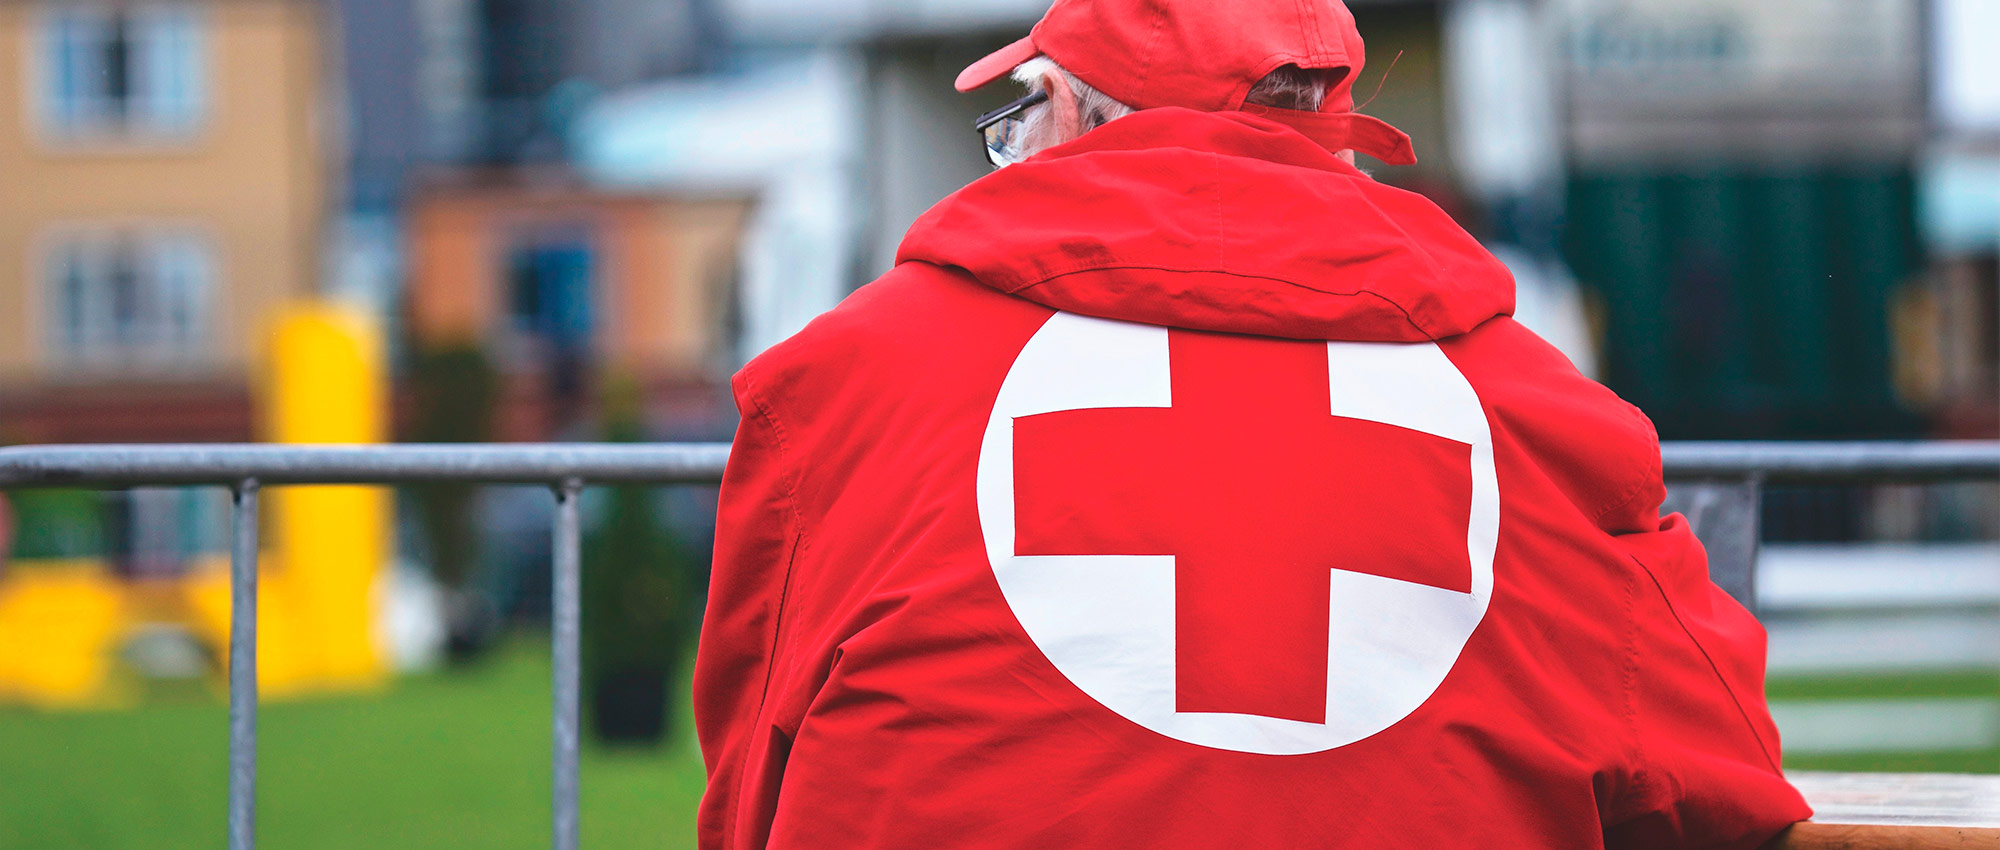 Man in a Red Cross jacket leaning over a fence